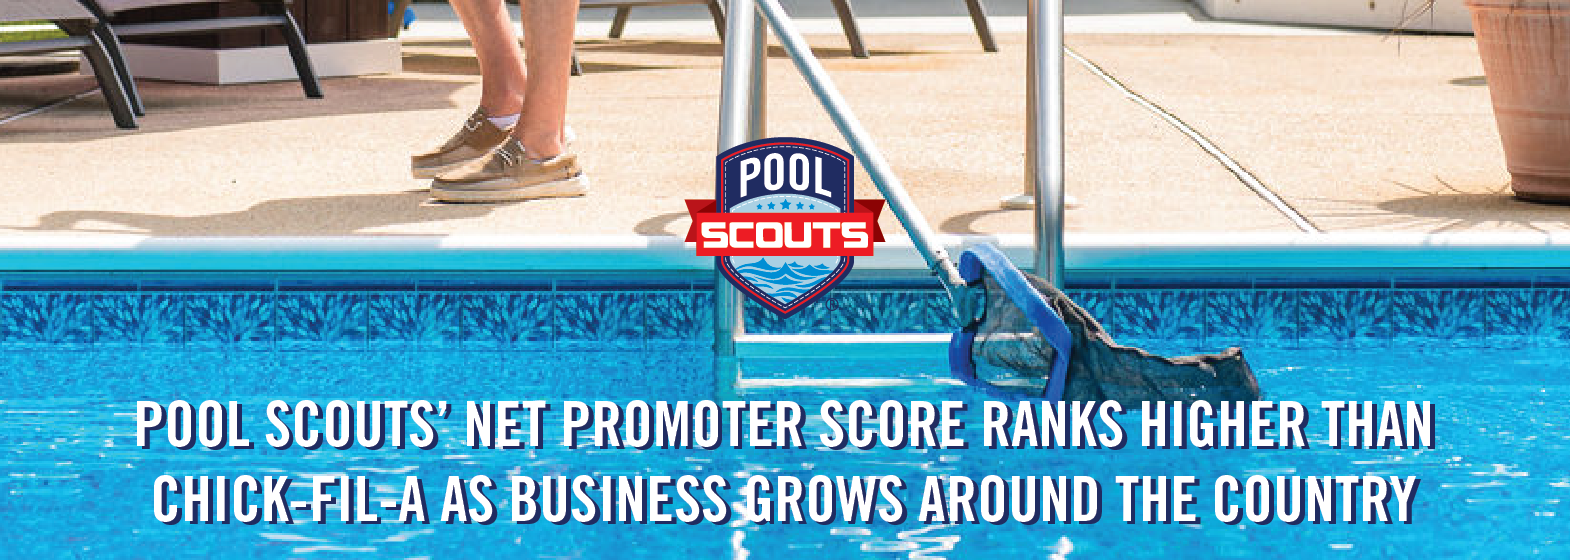 Image of Pool Scouts’ Net Promoter Score Ranks Higher Than Chick-Fil-A As Business Grows Around the Country